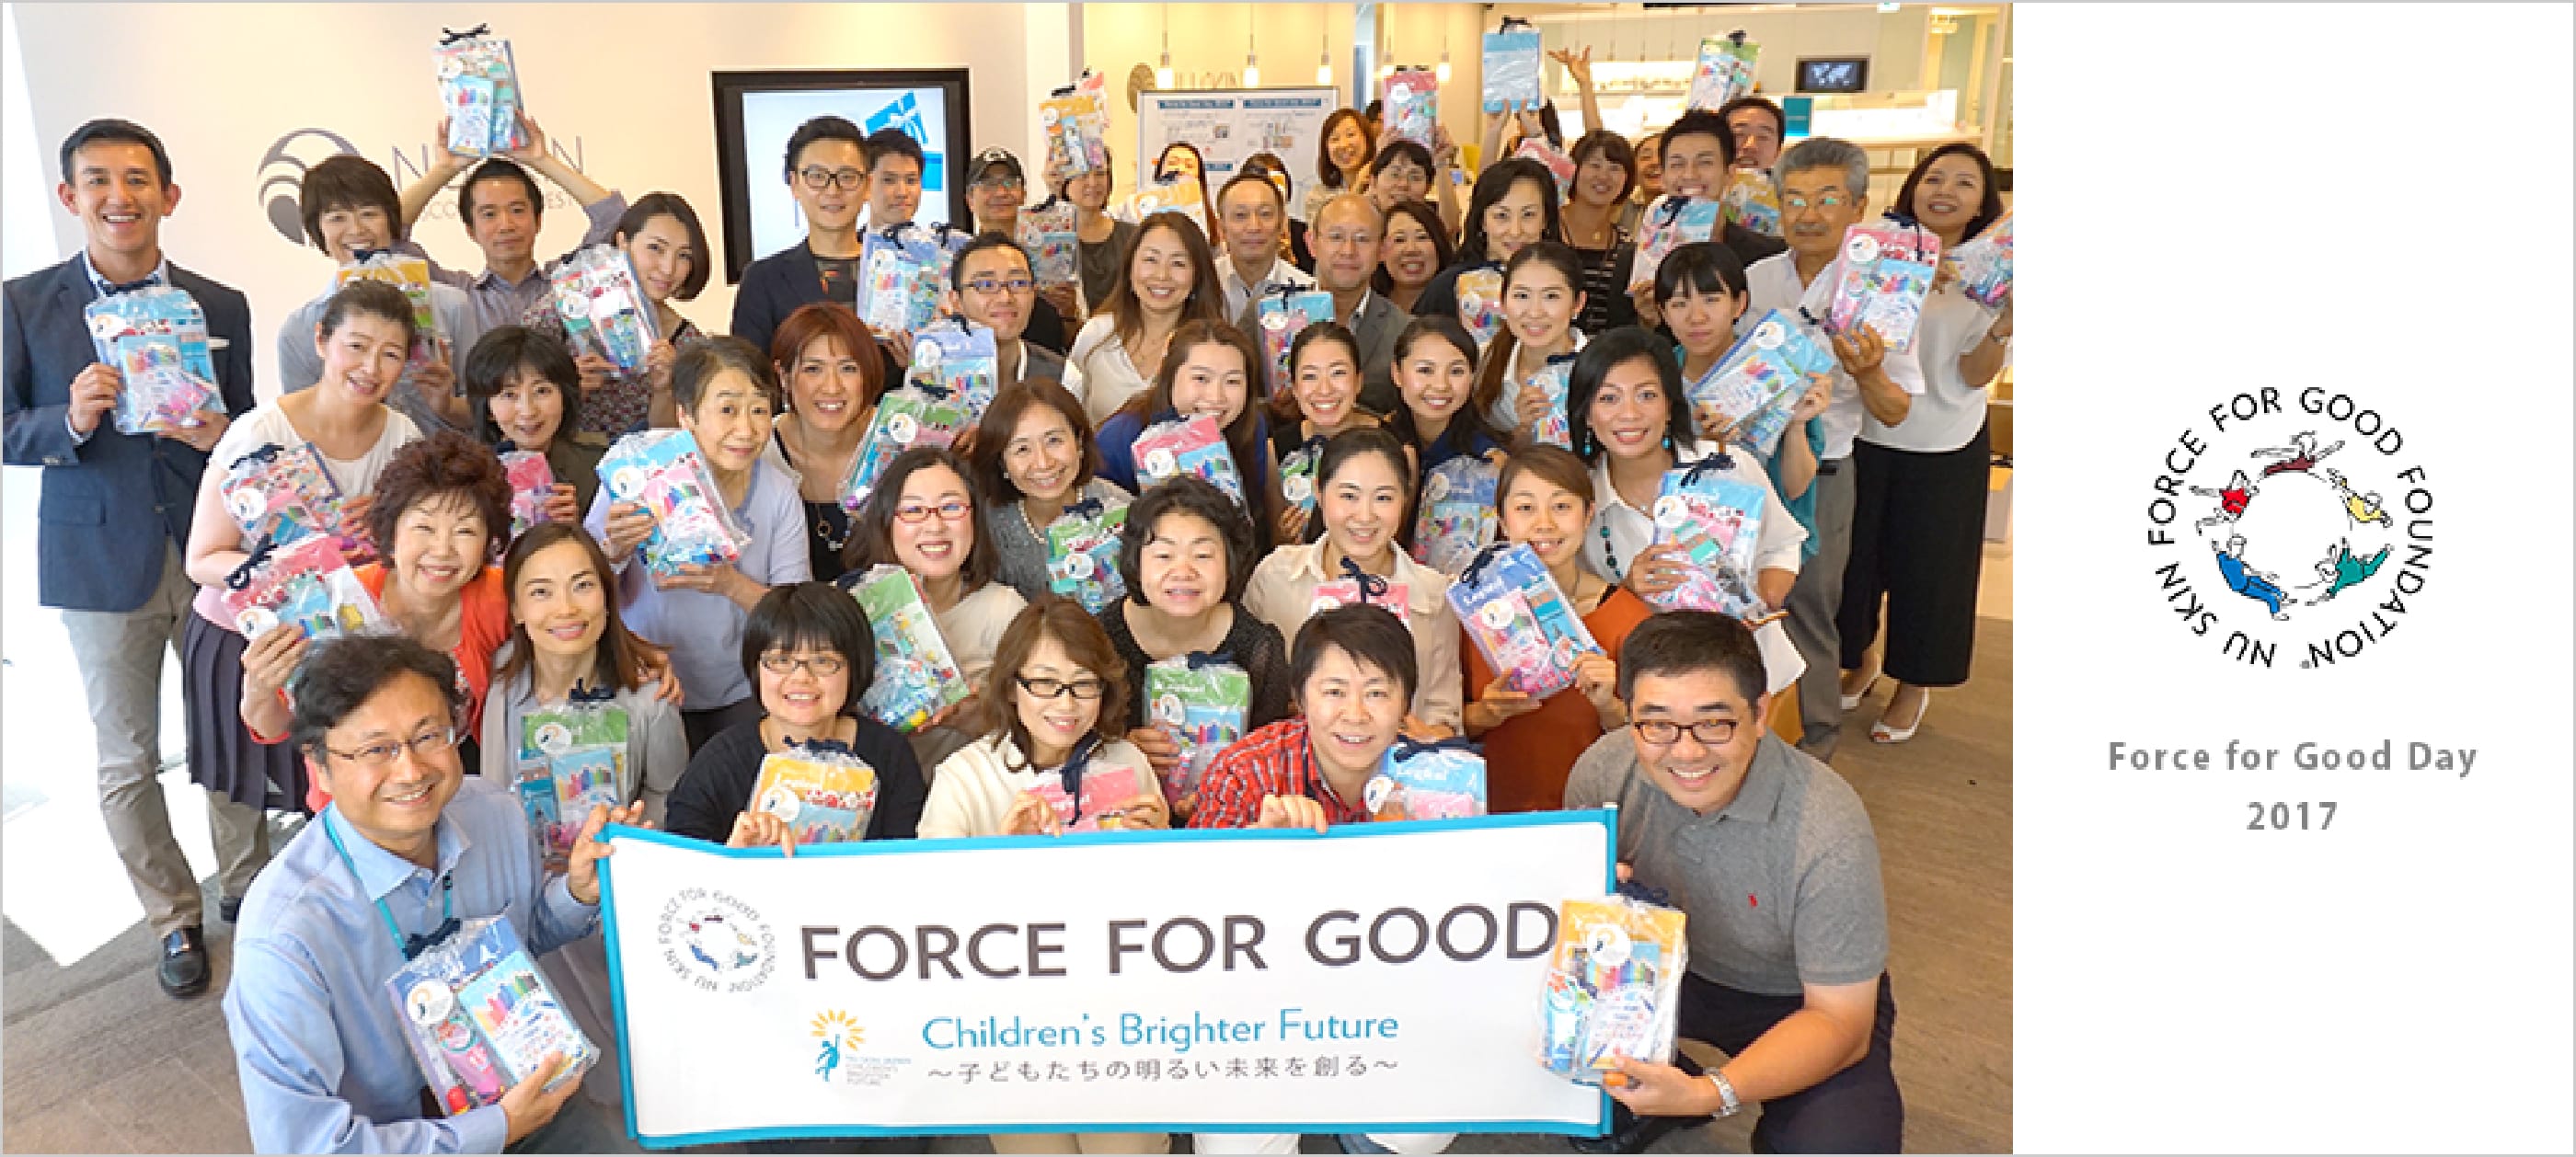 Force for Good Day 2017 開催